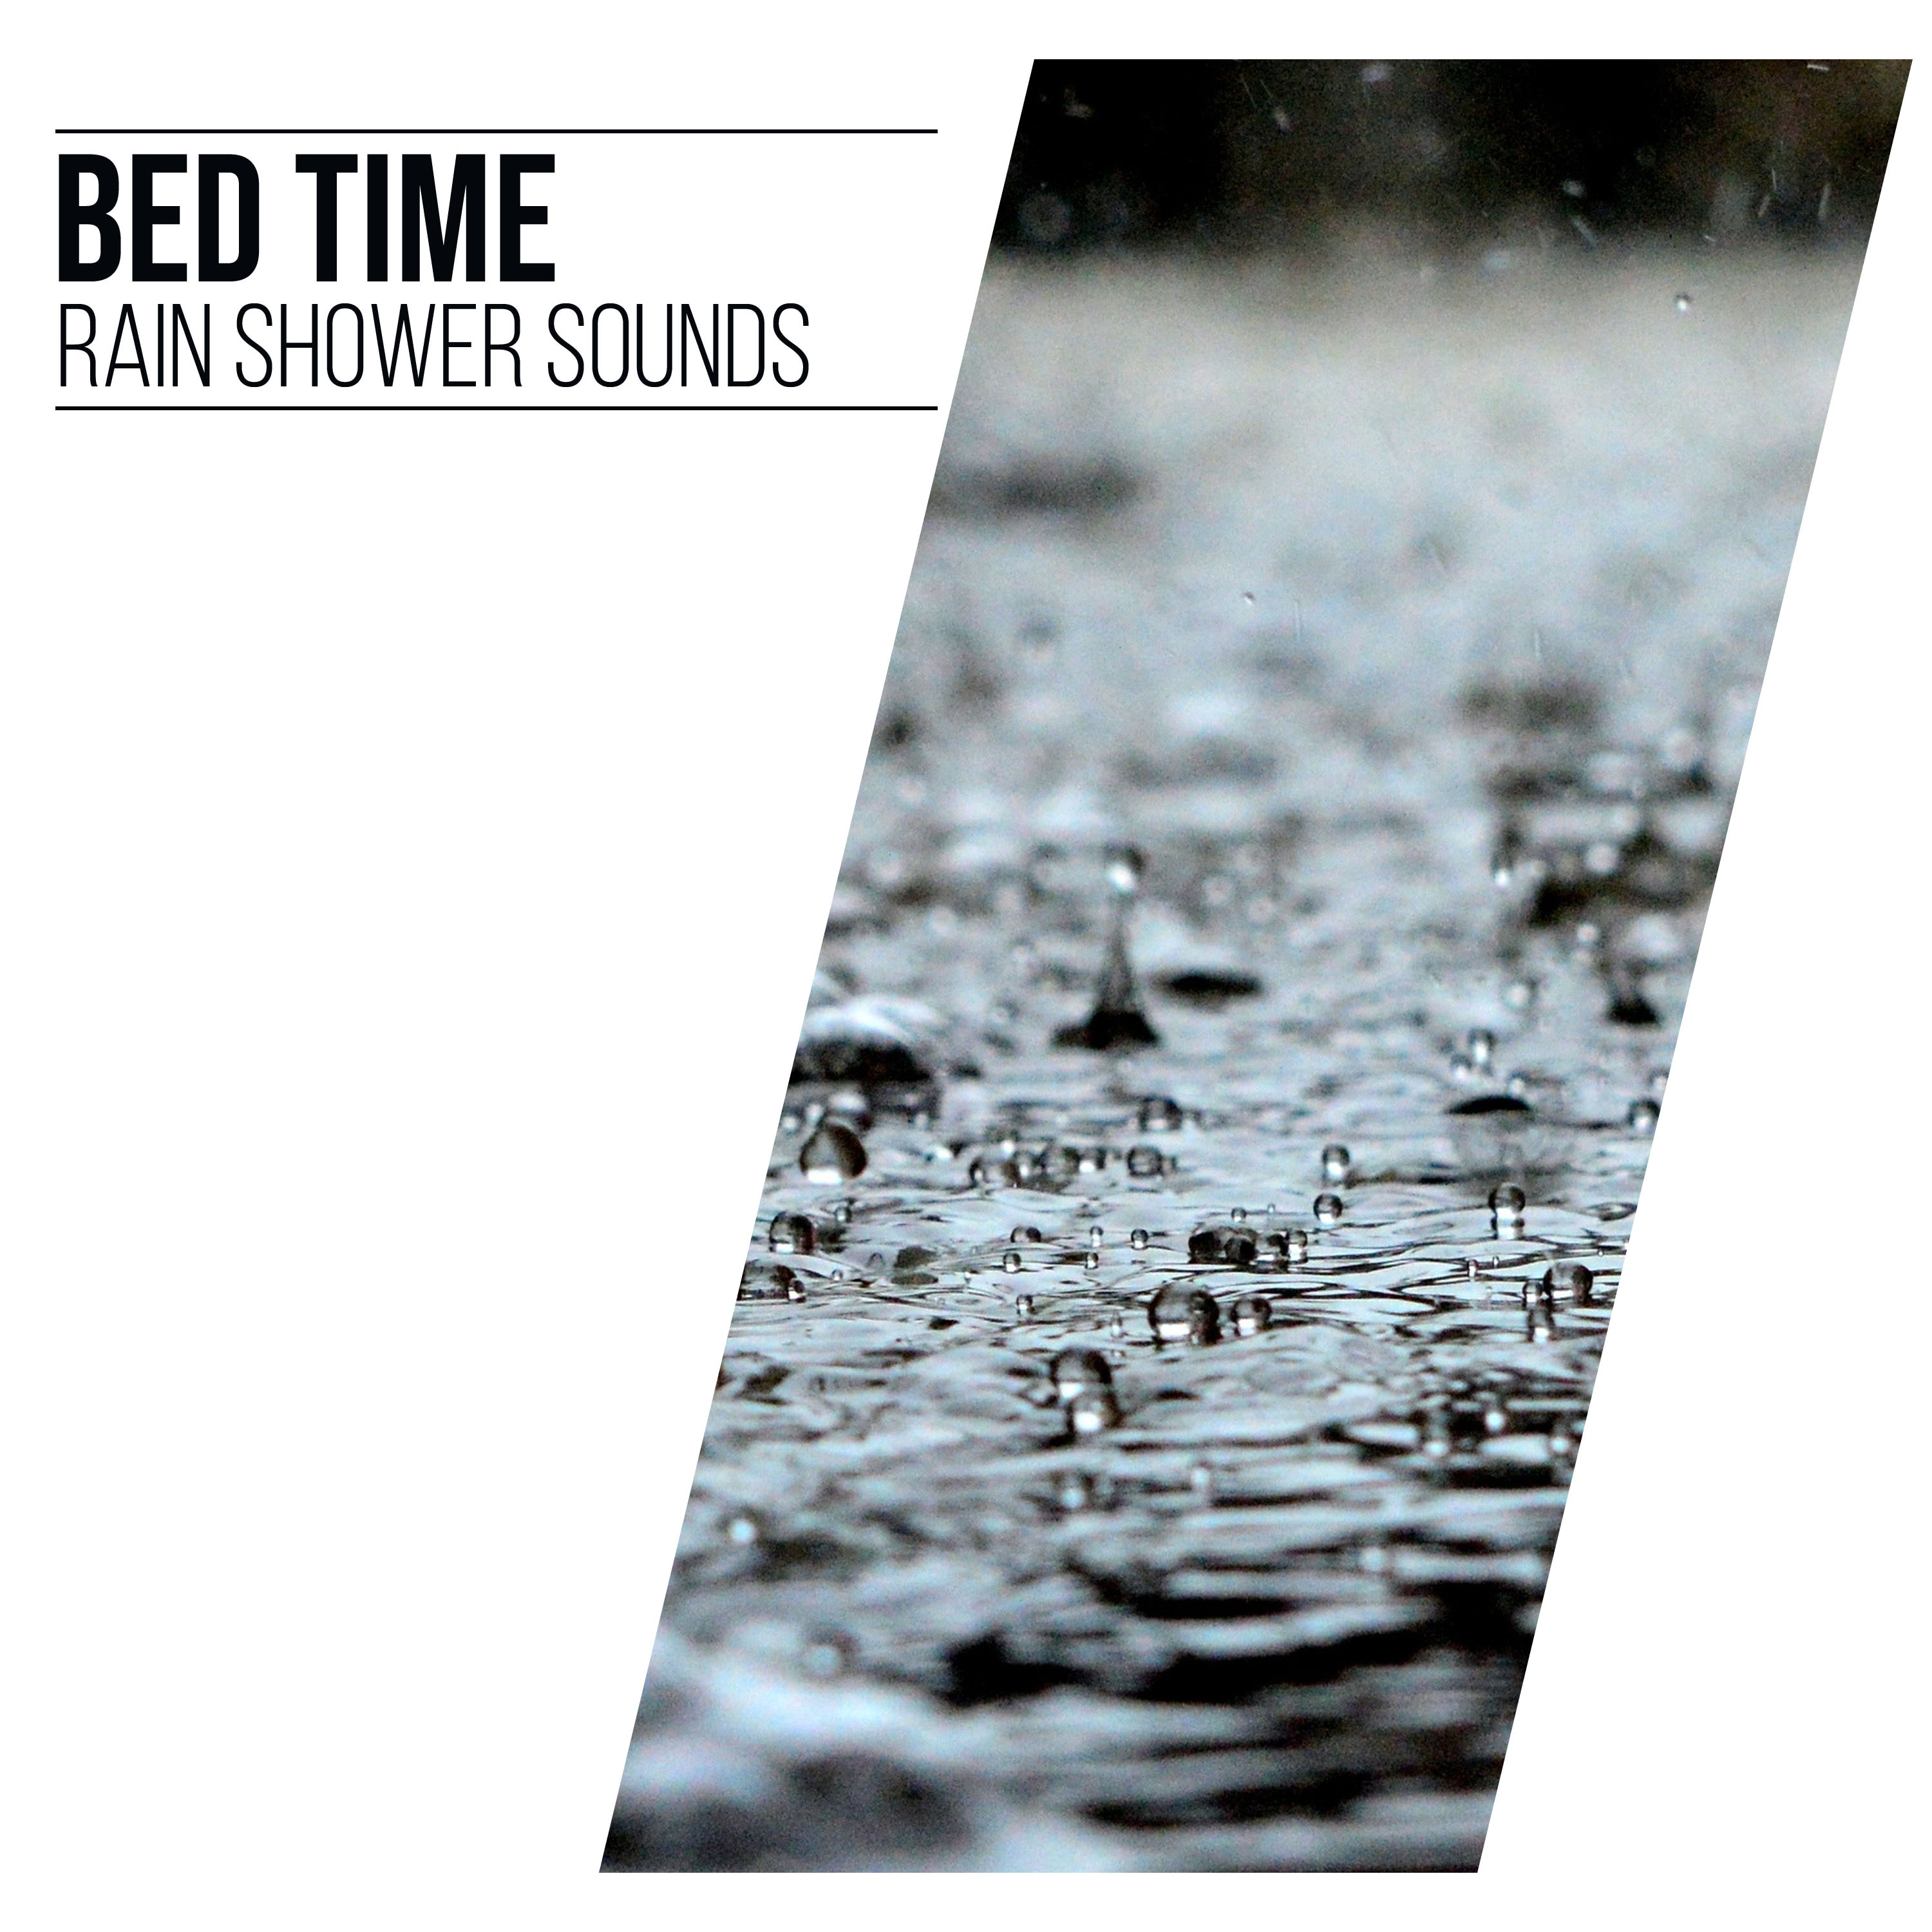 #1 Hour of Bed Time Rain Shower Sounds